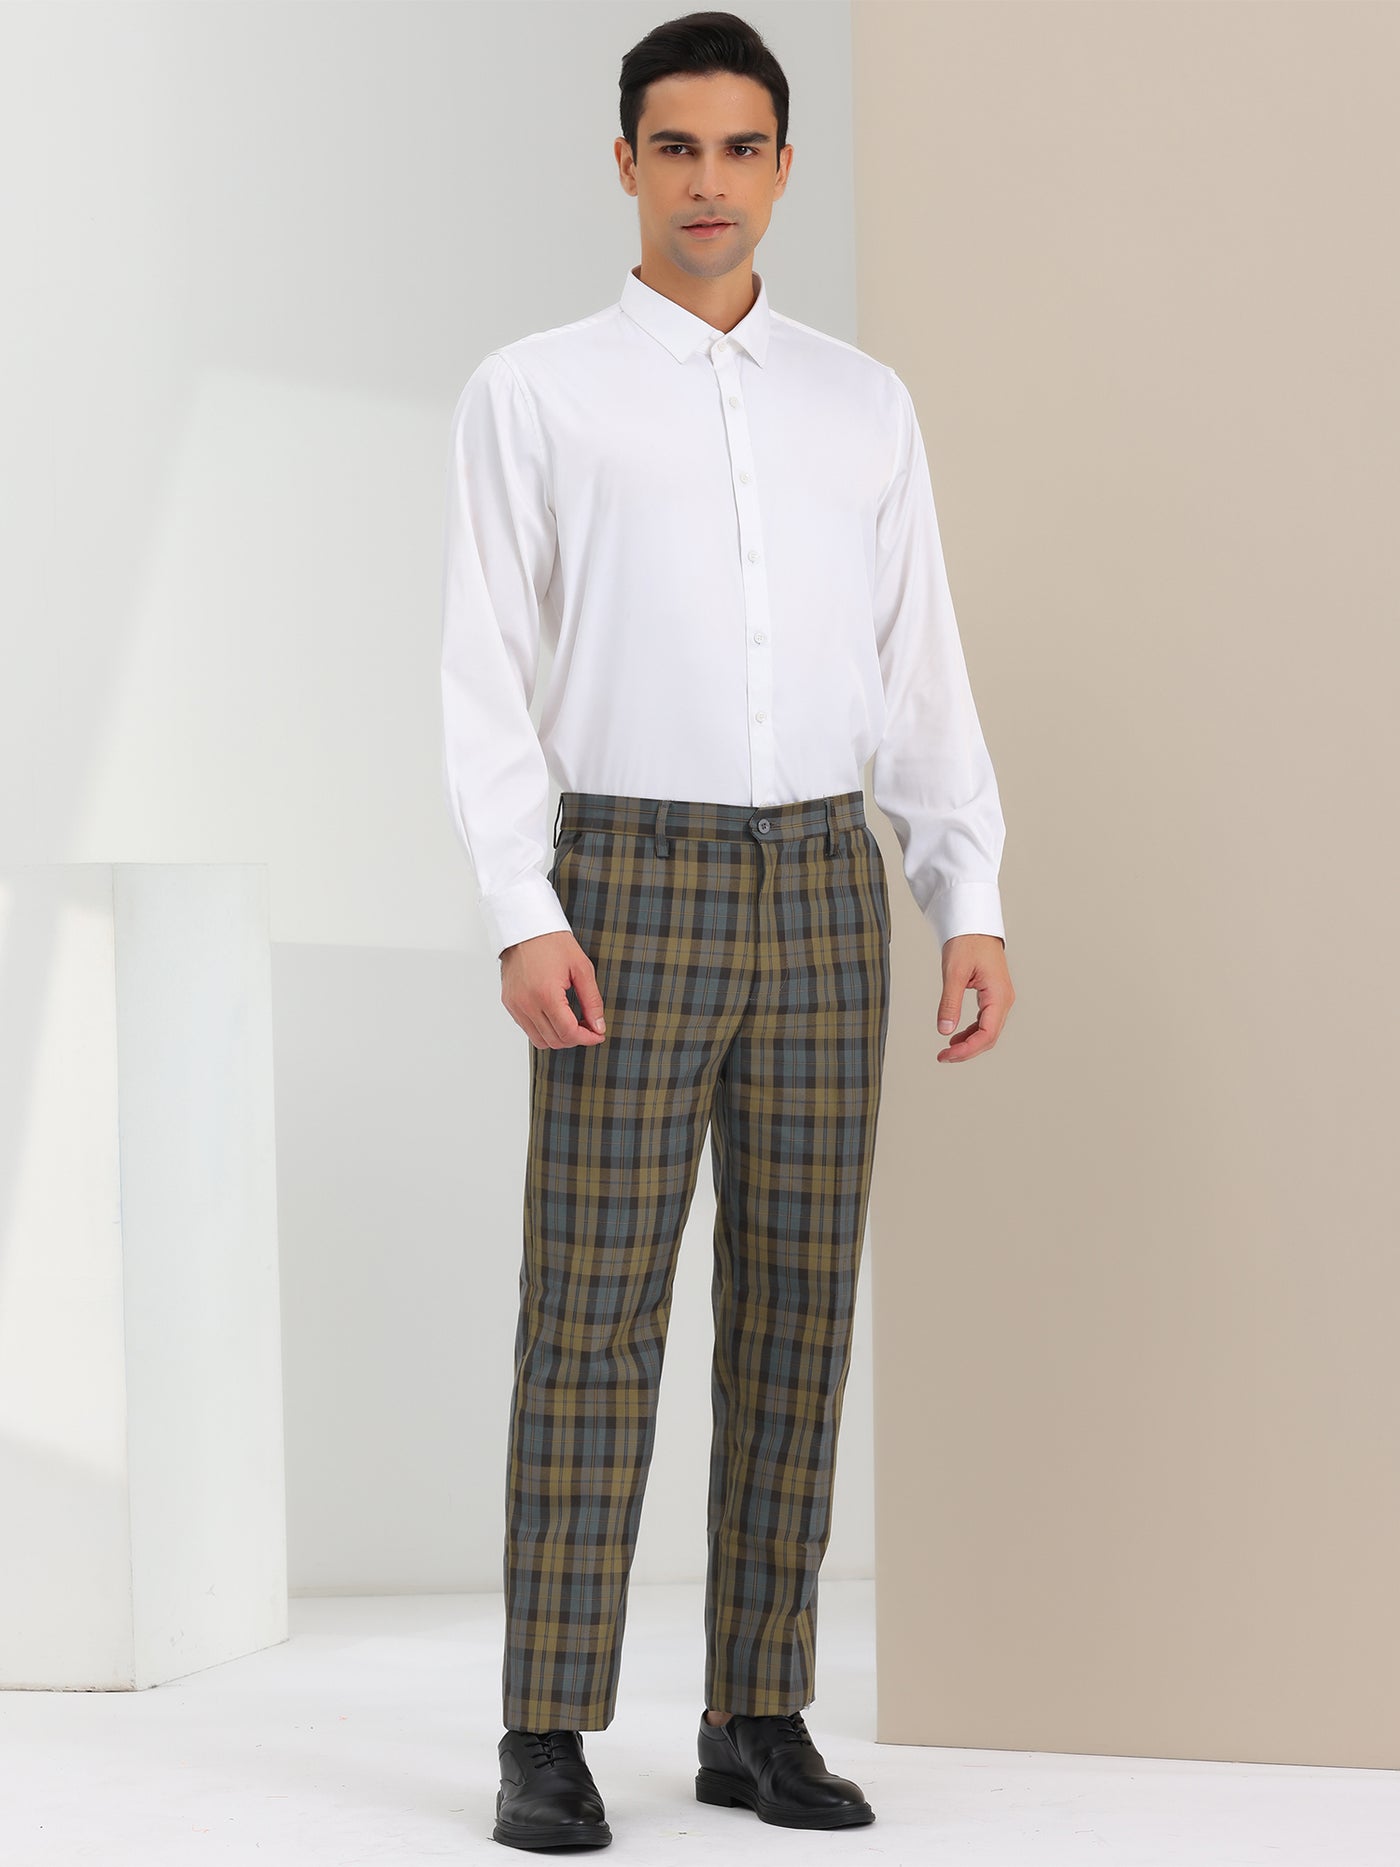 Bublédon Men's Plaid Relax Fit Flat Front Checked Office Work Dress Pants